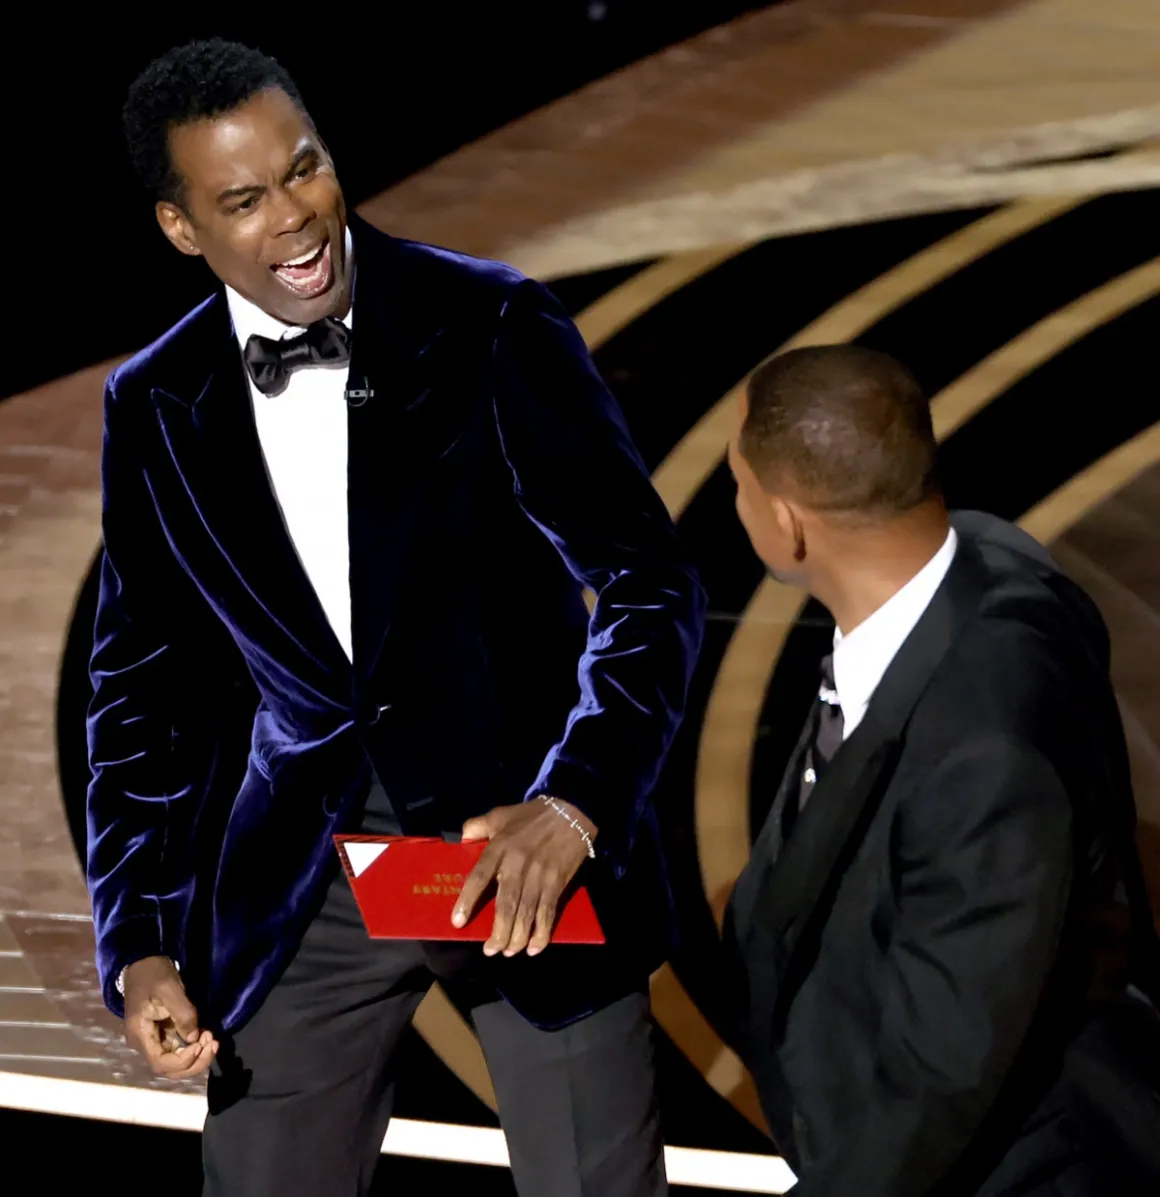 Chris Rock To File $500 Million Lawsuit Against Will Smith!